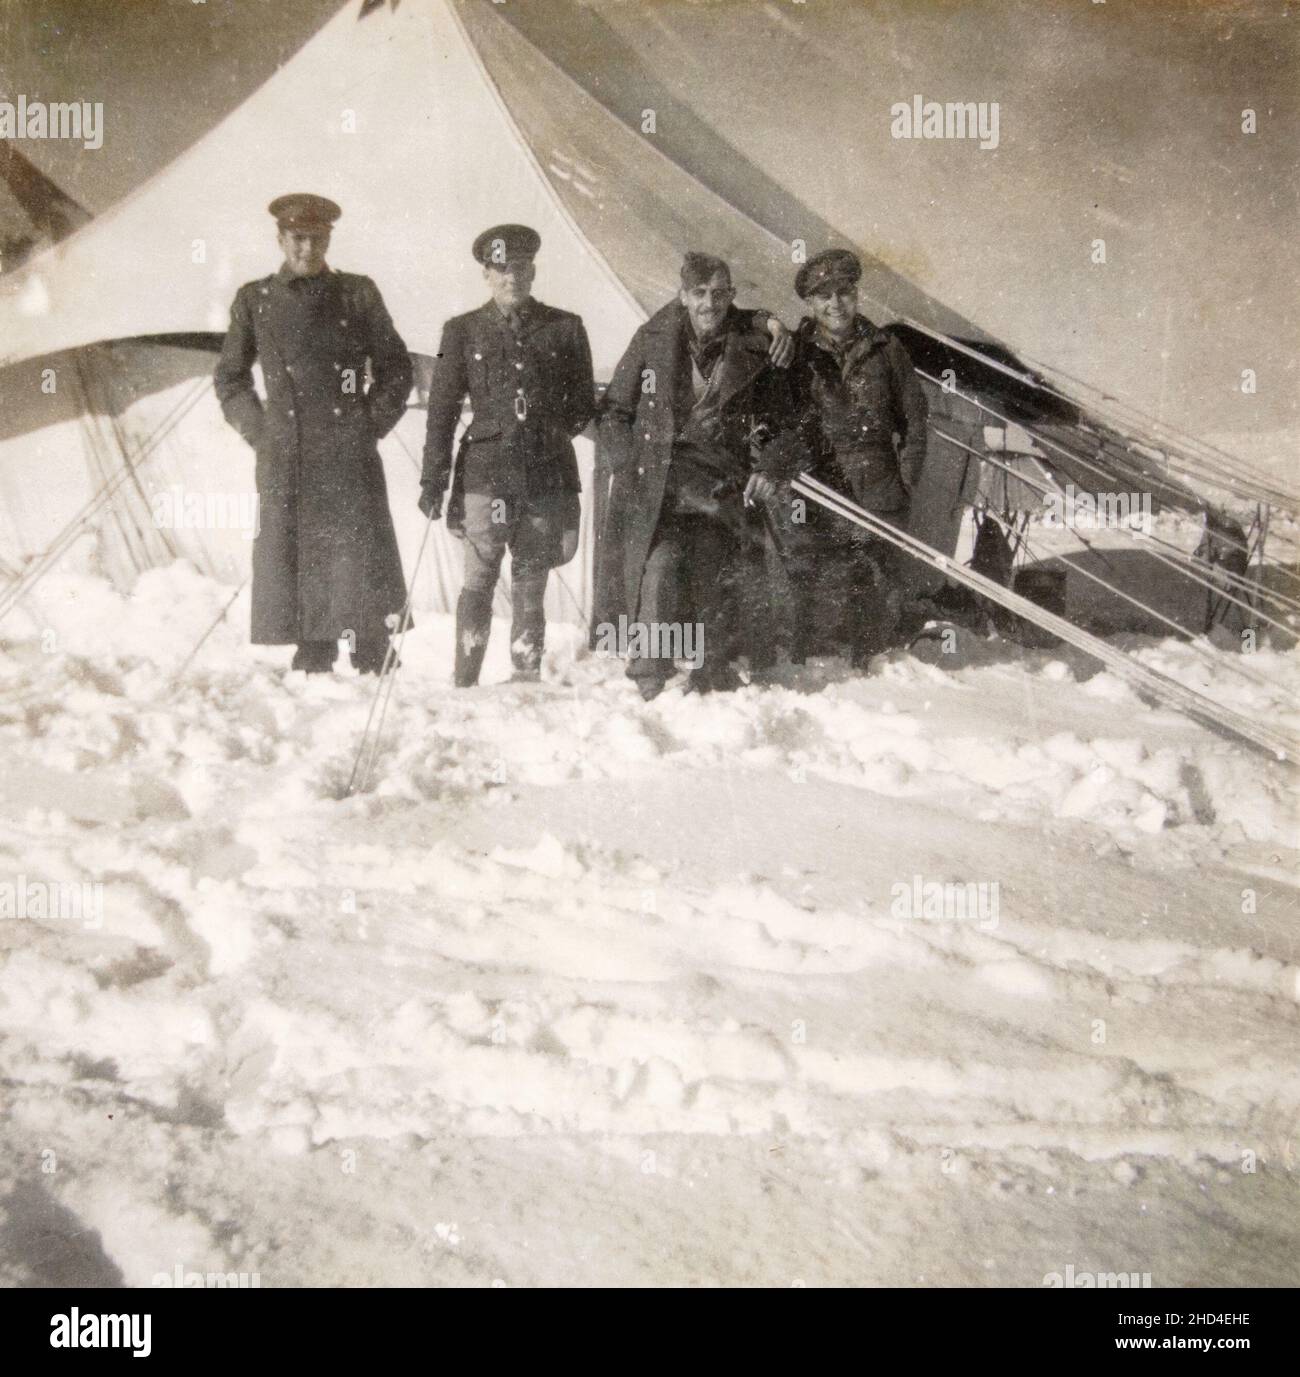 H.Q. of the 10th Indian Infantry Division, Erbil, Iraq, 1941-2. Anglo-Iraqi War. In the snow in the desert camp. They were on their way to India but got diverted to Iraq. Here are some Officers in front of their tent after a heavy snowfall. Stock Photo